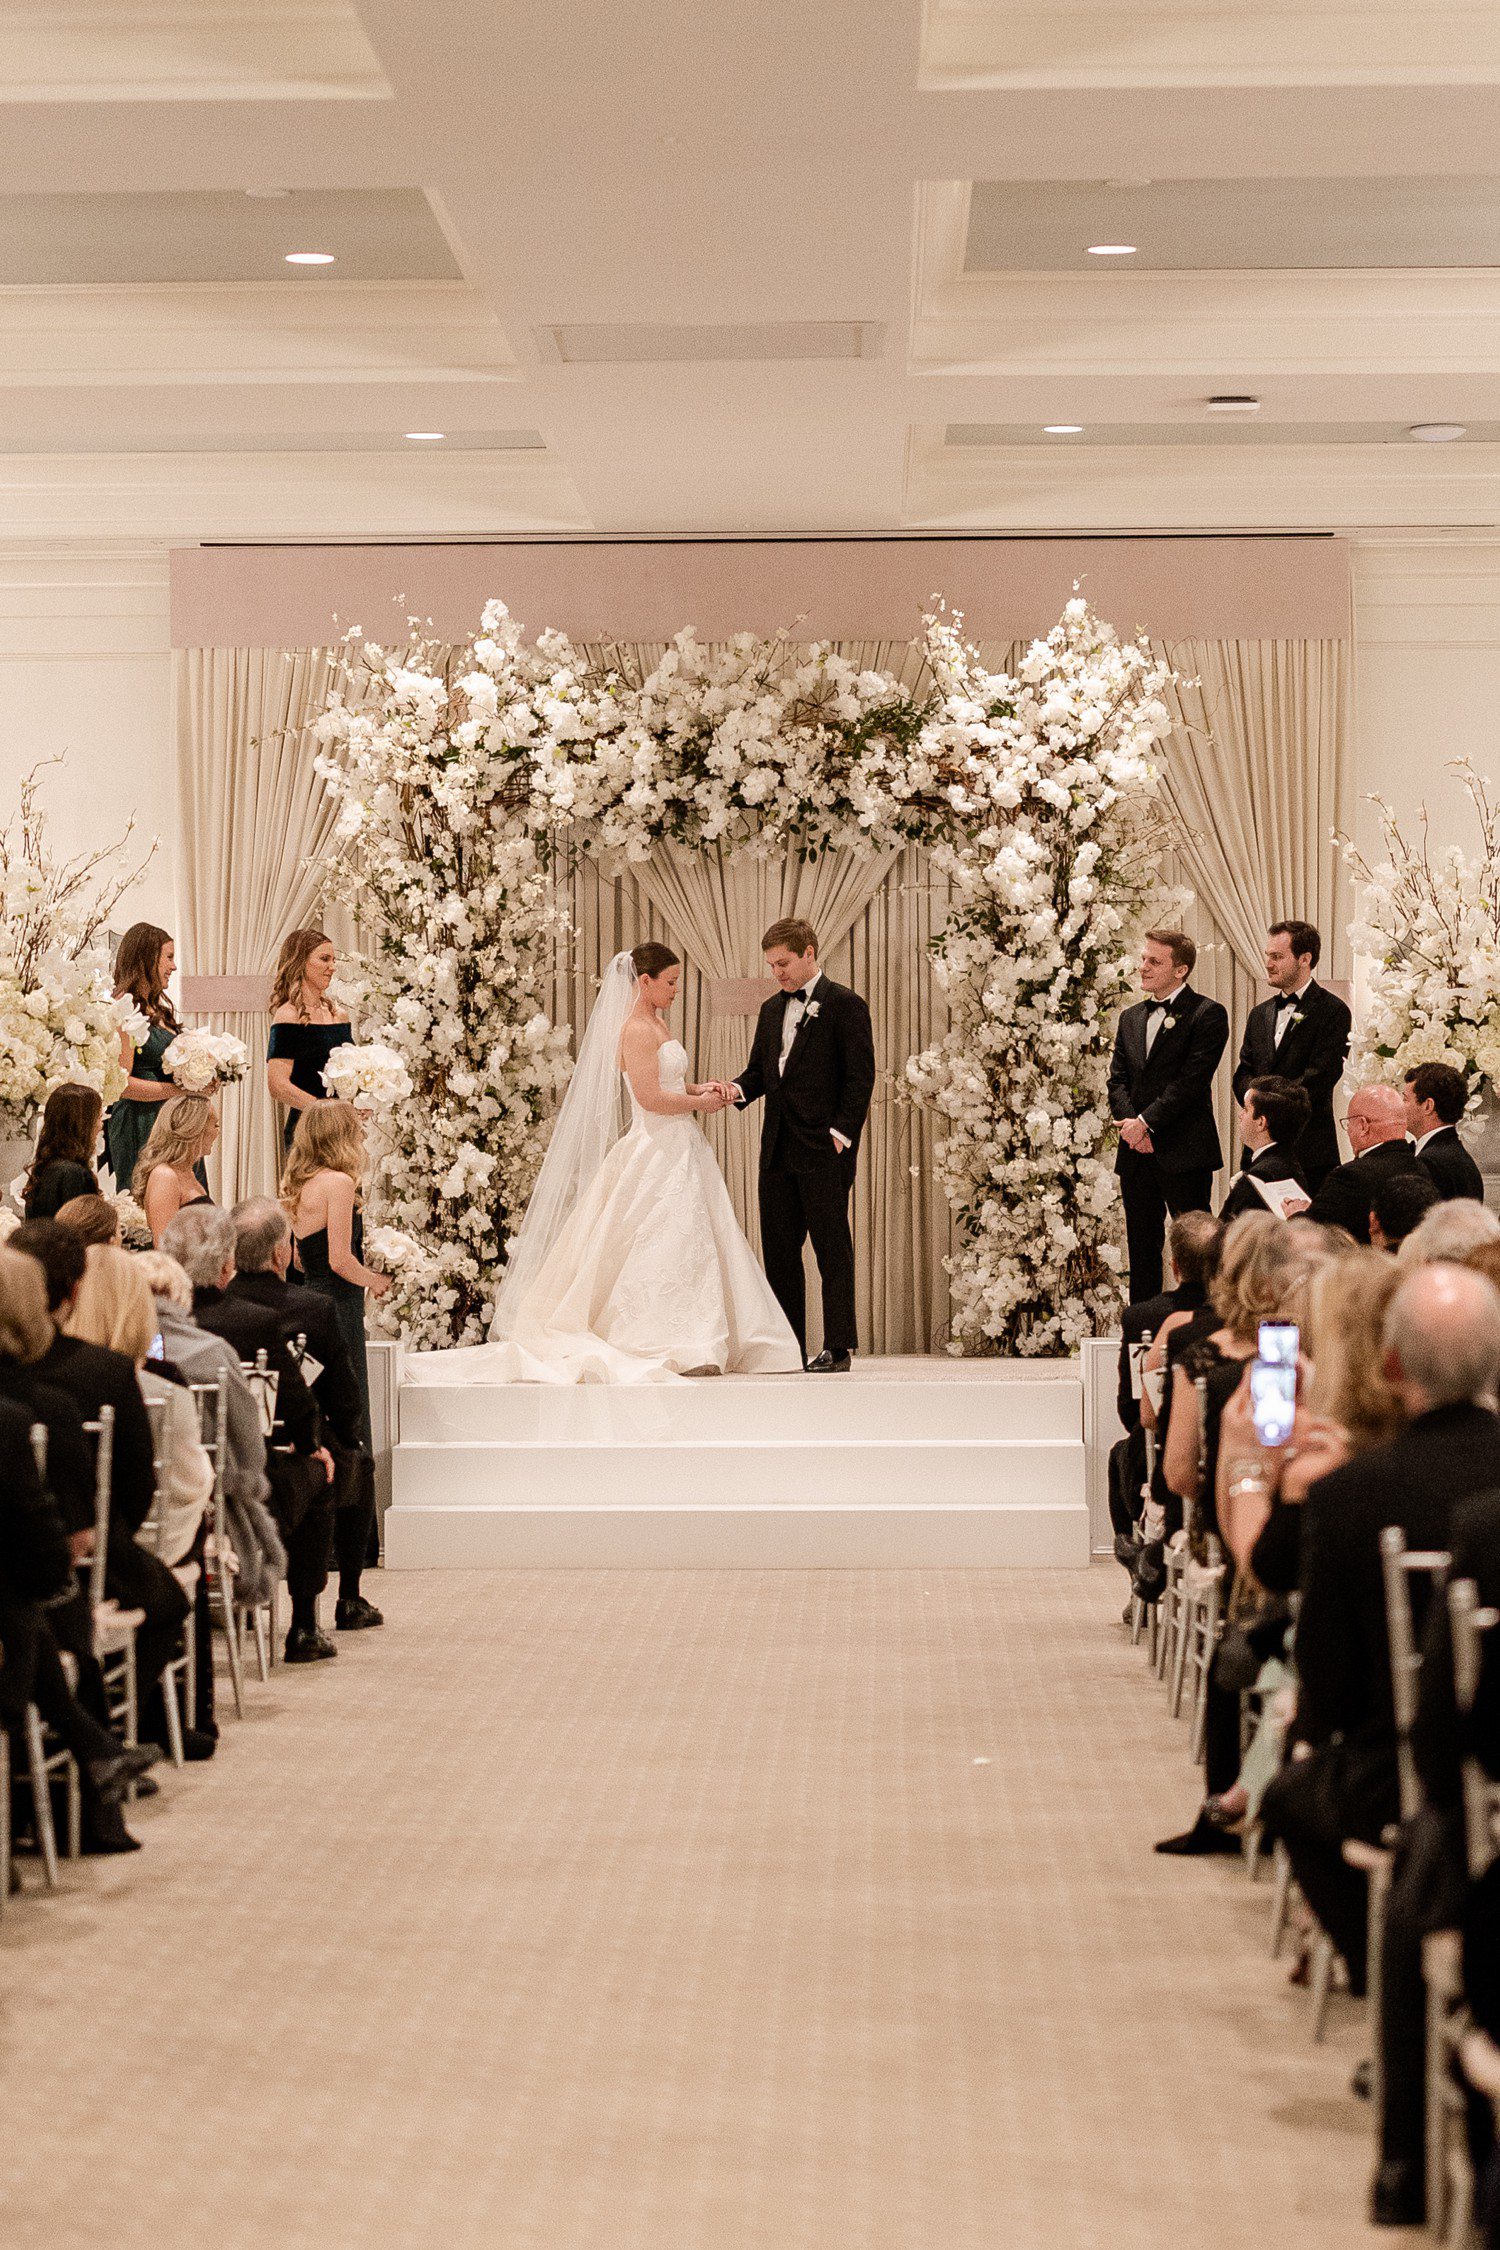 Houston Country Club wedding ceremony with cherry blossoms